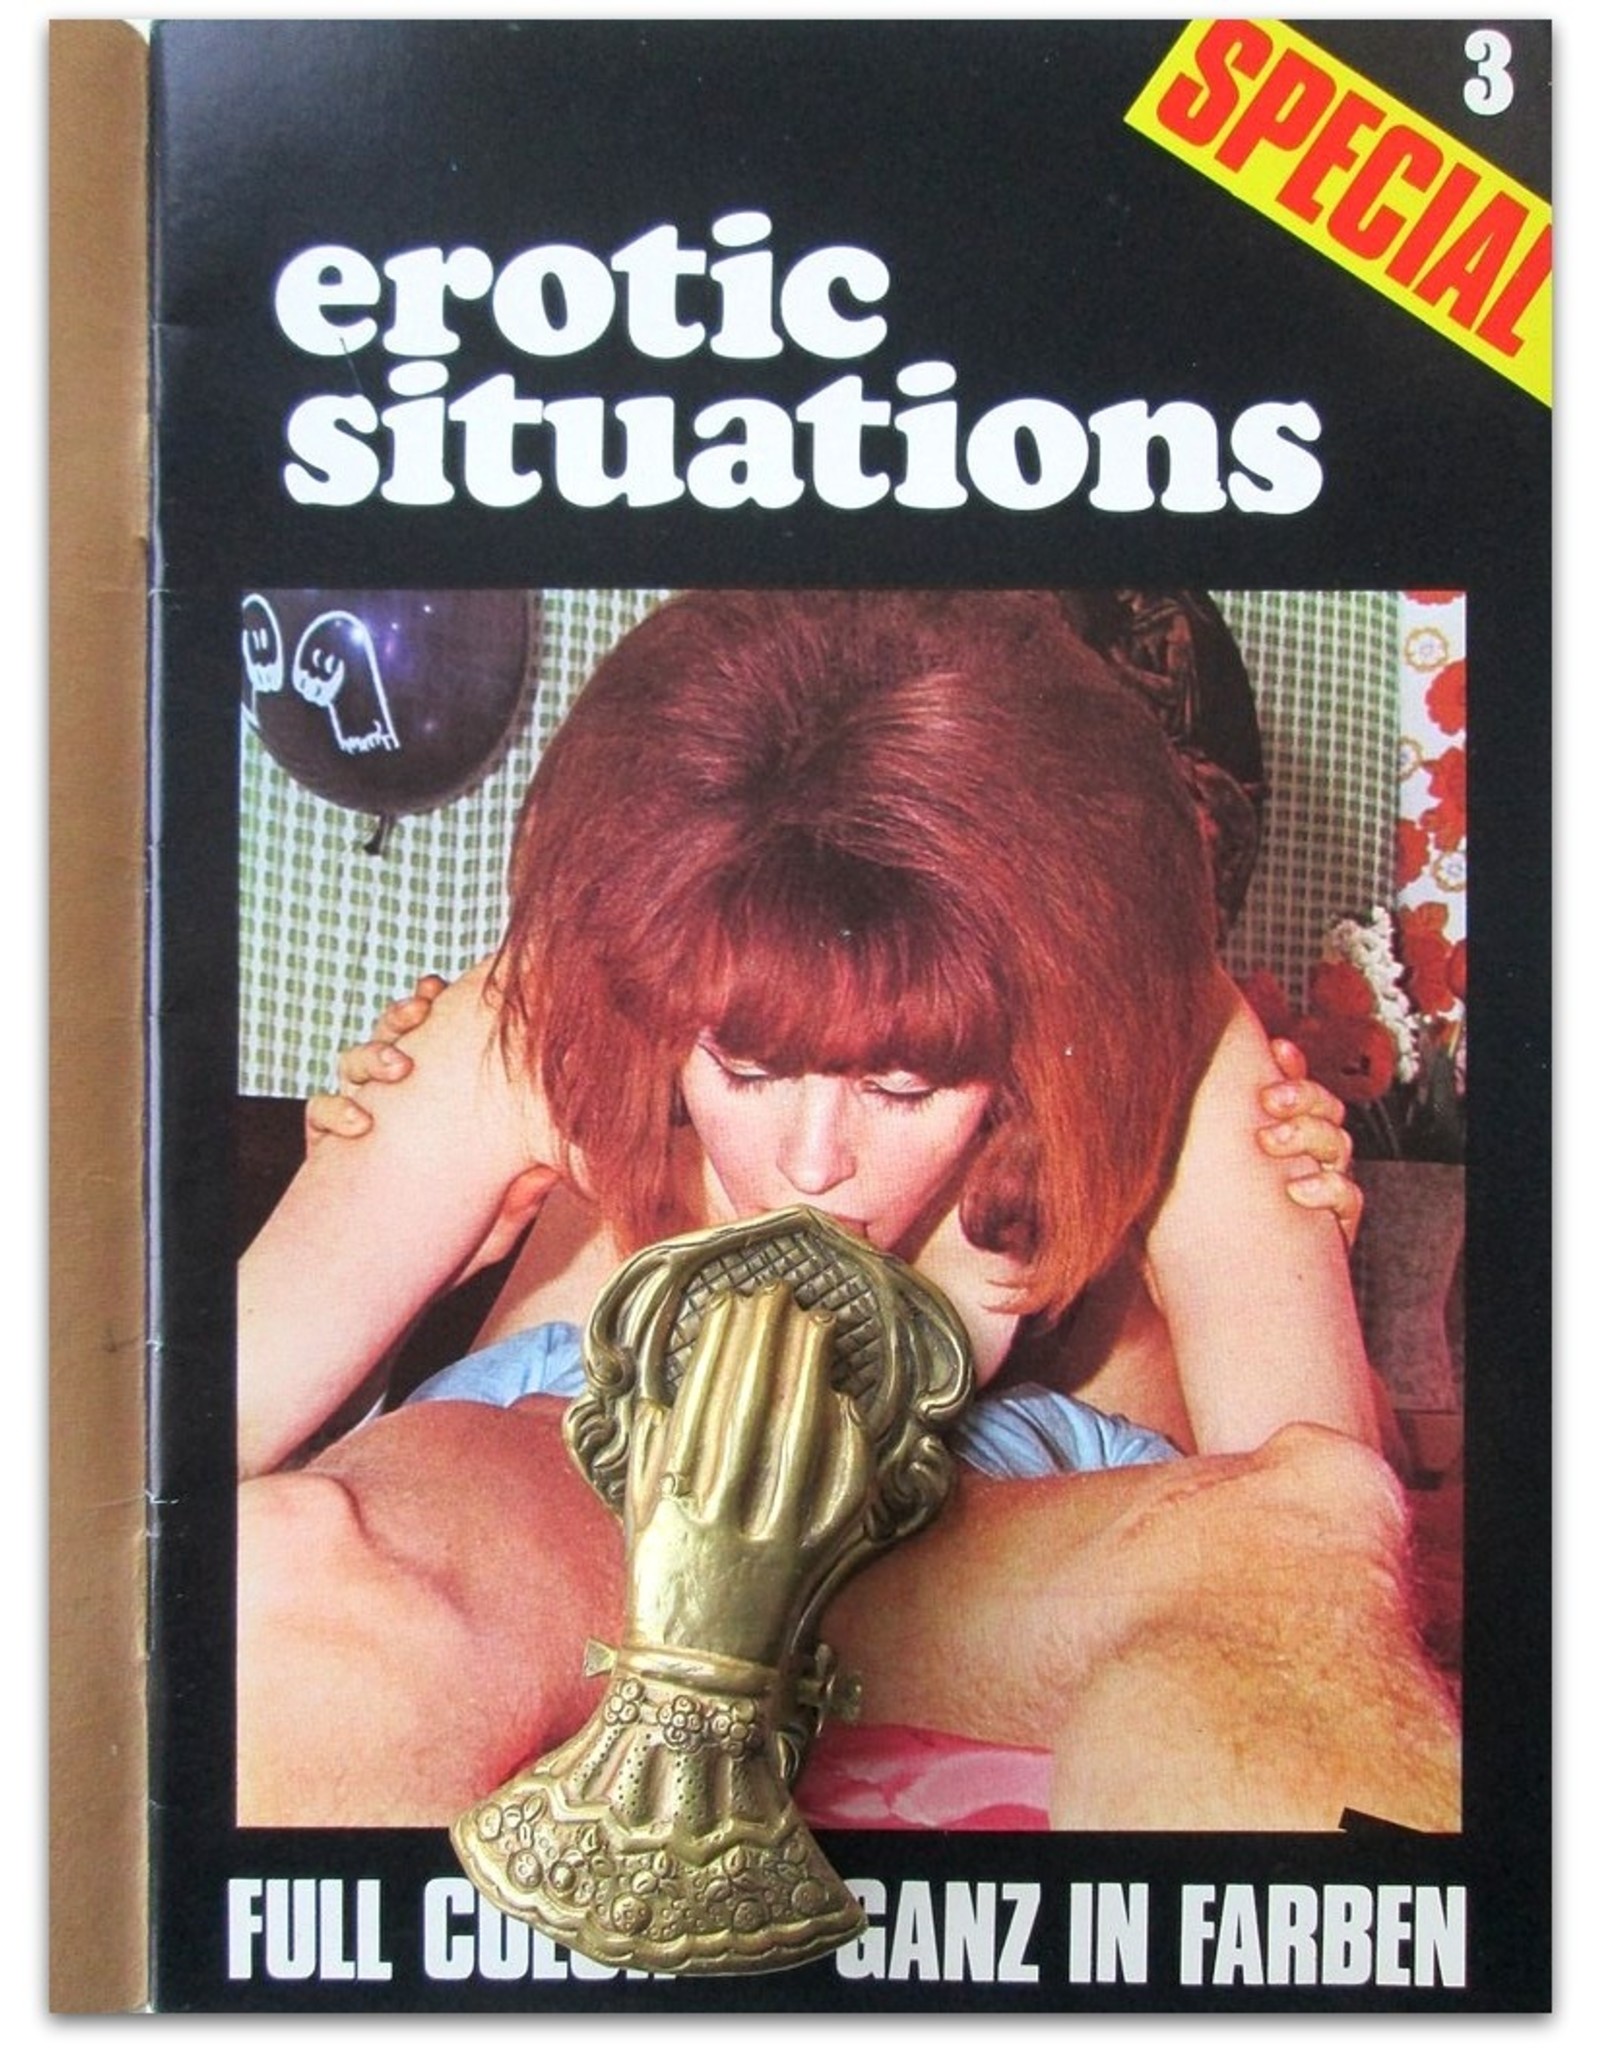 Ole Djervig - Erotic Situations Special 3. Full Color